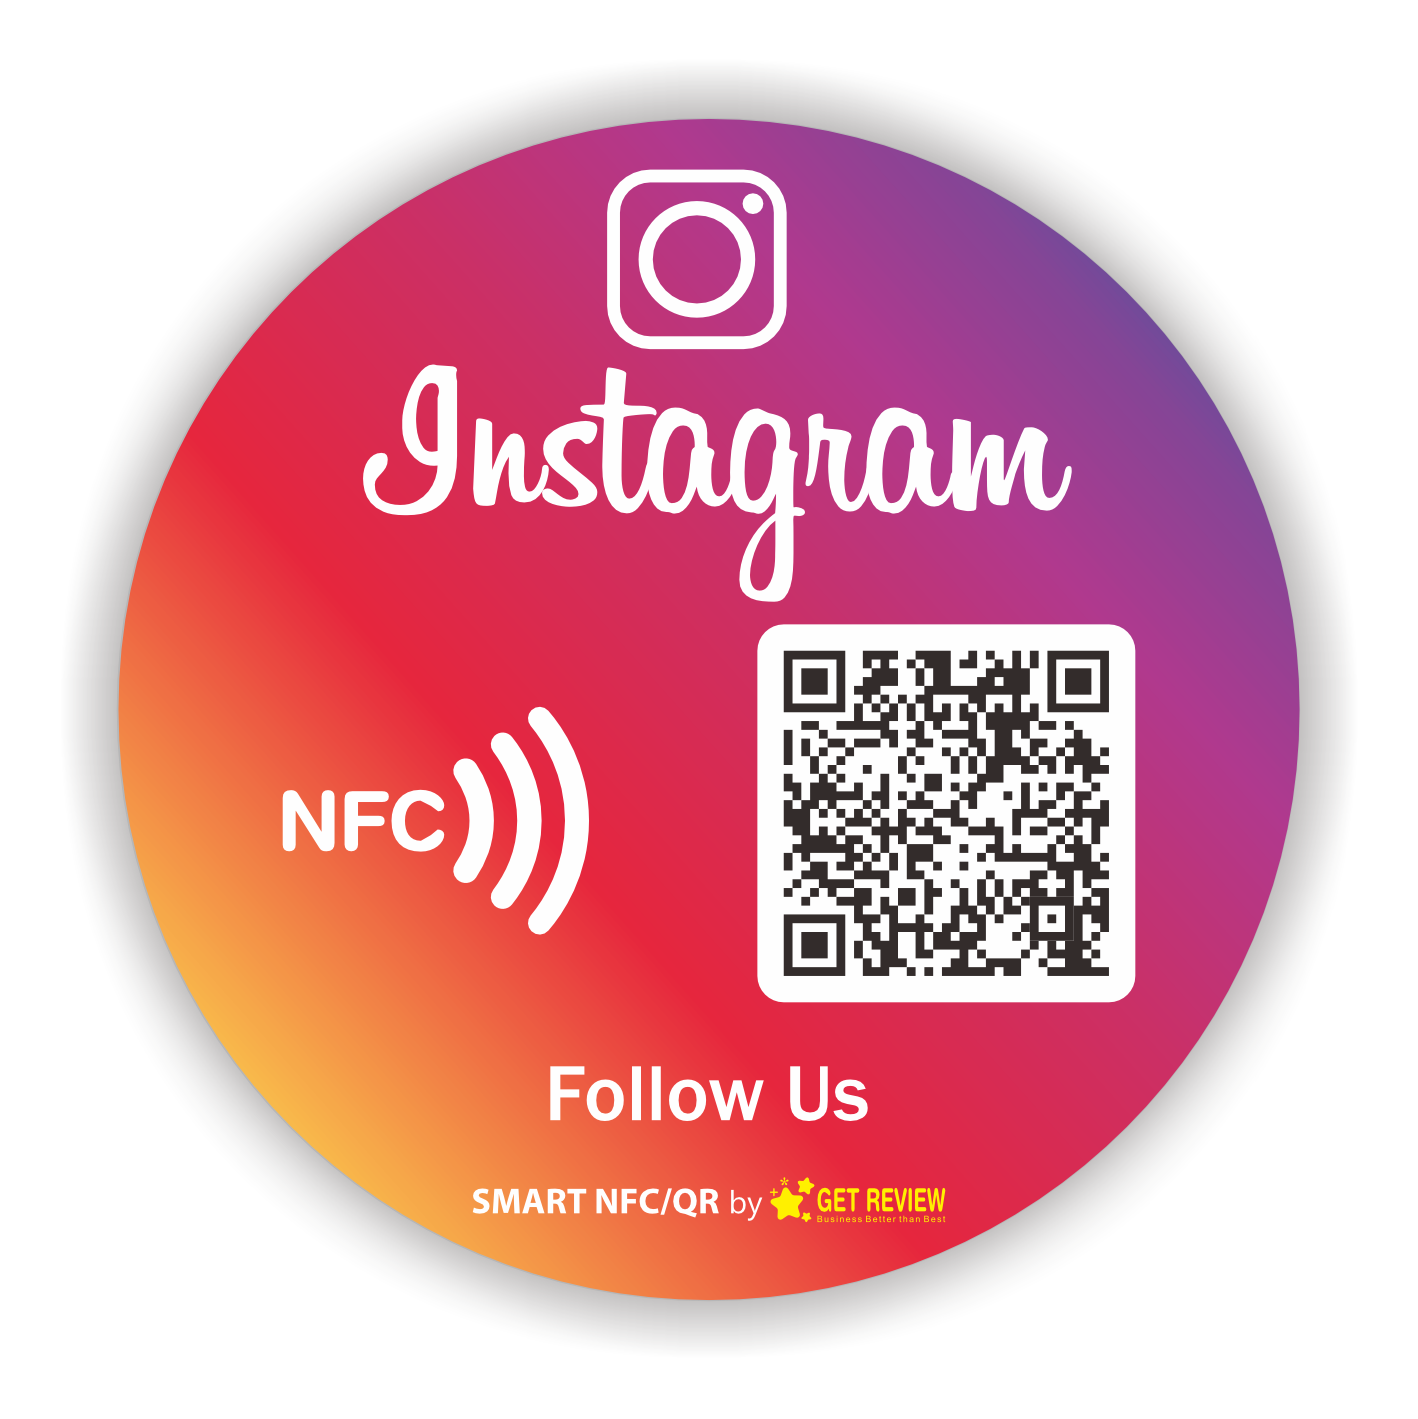 Follow us on Instagram sticker/card with QR & NFC